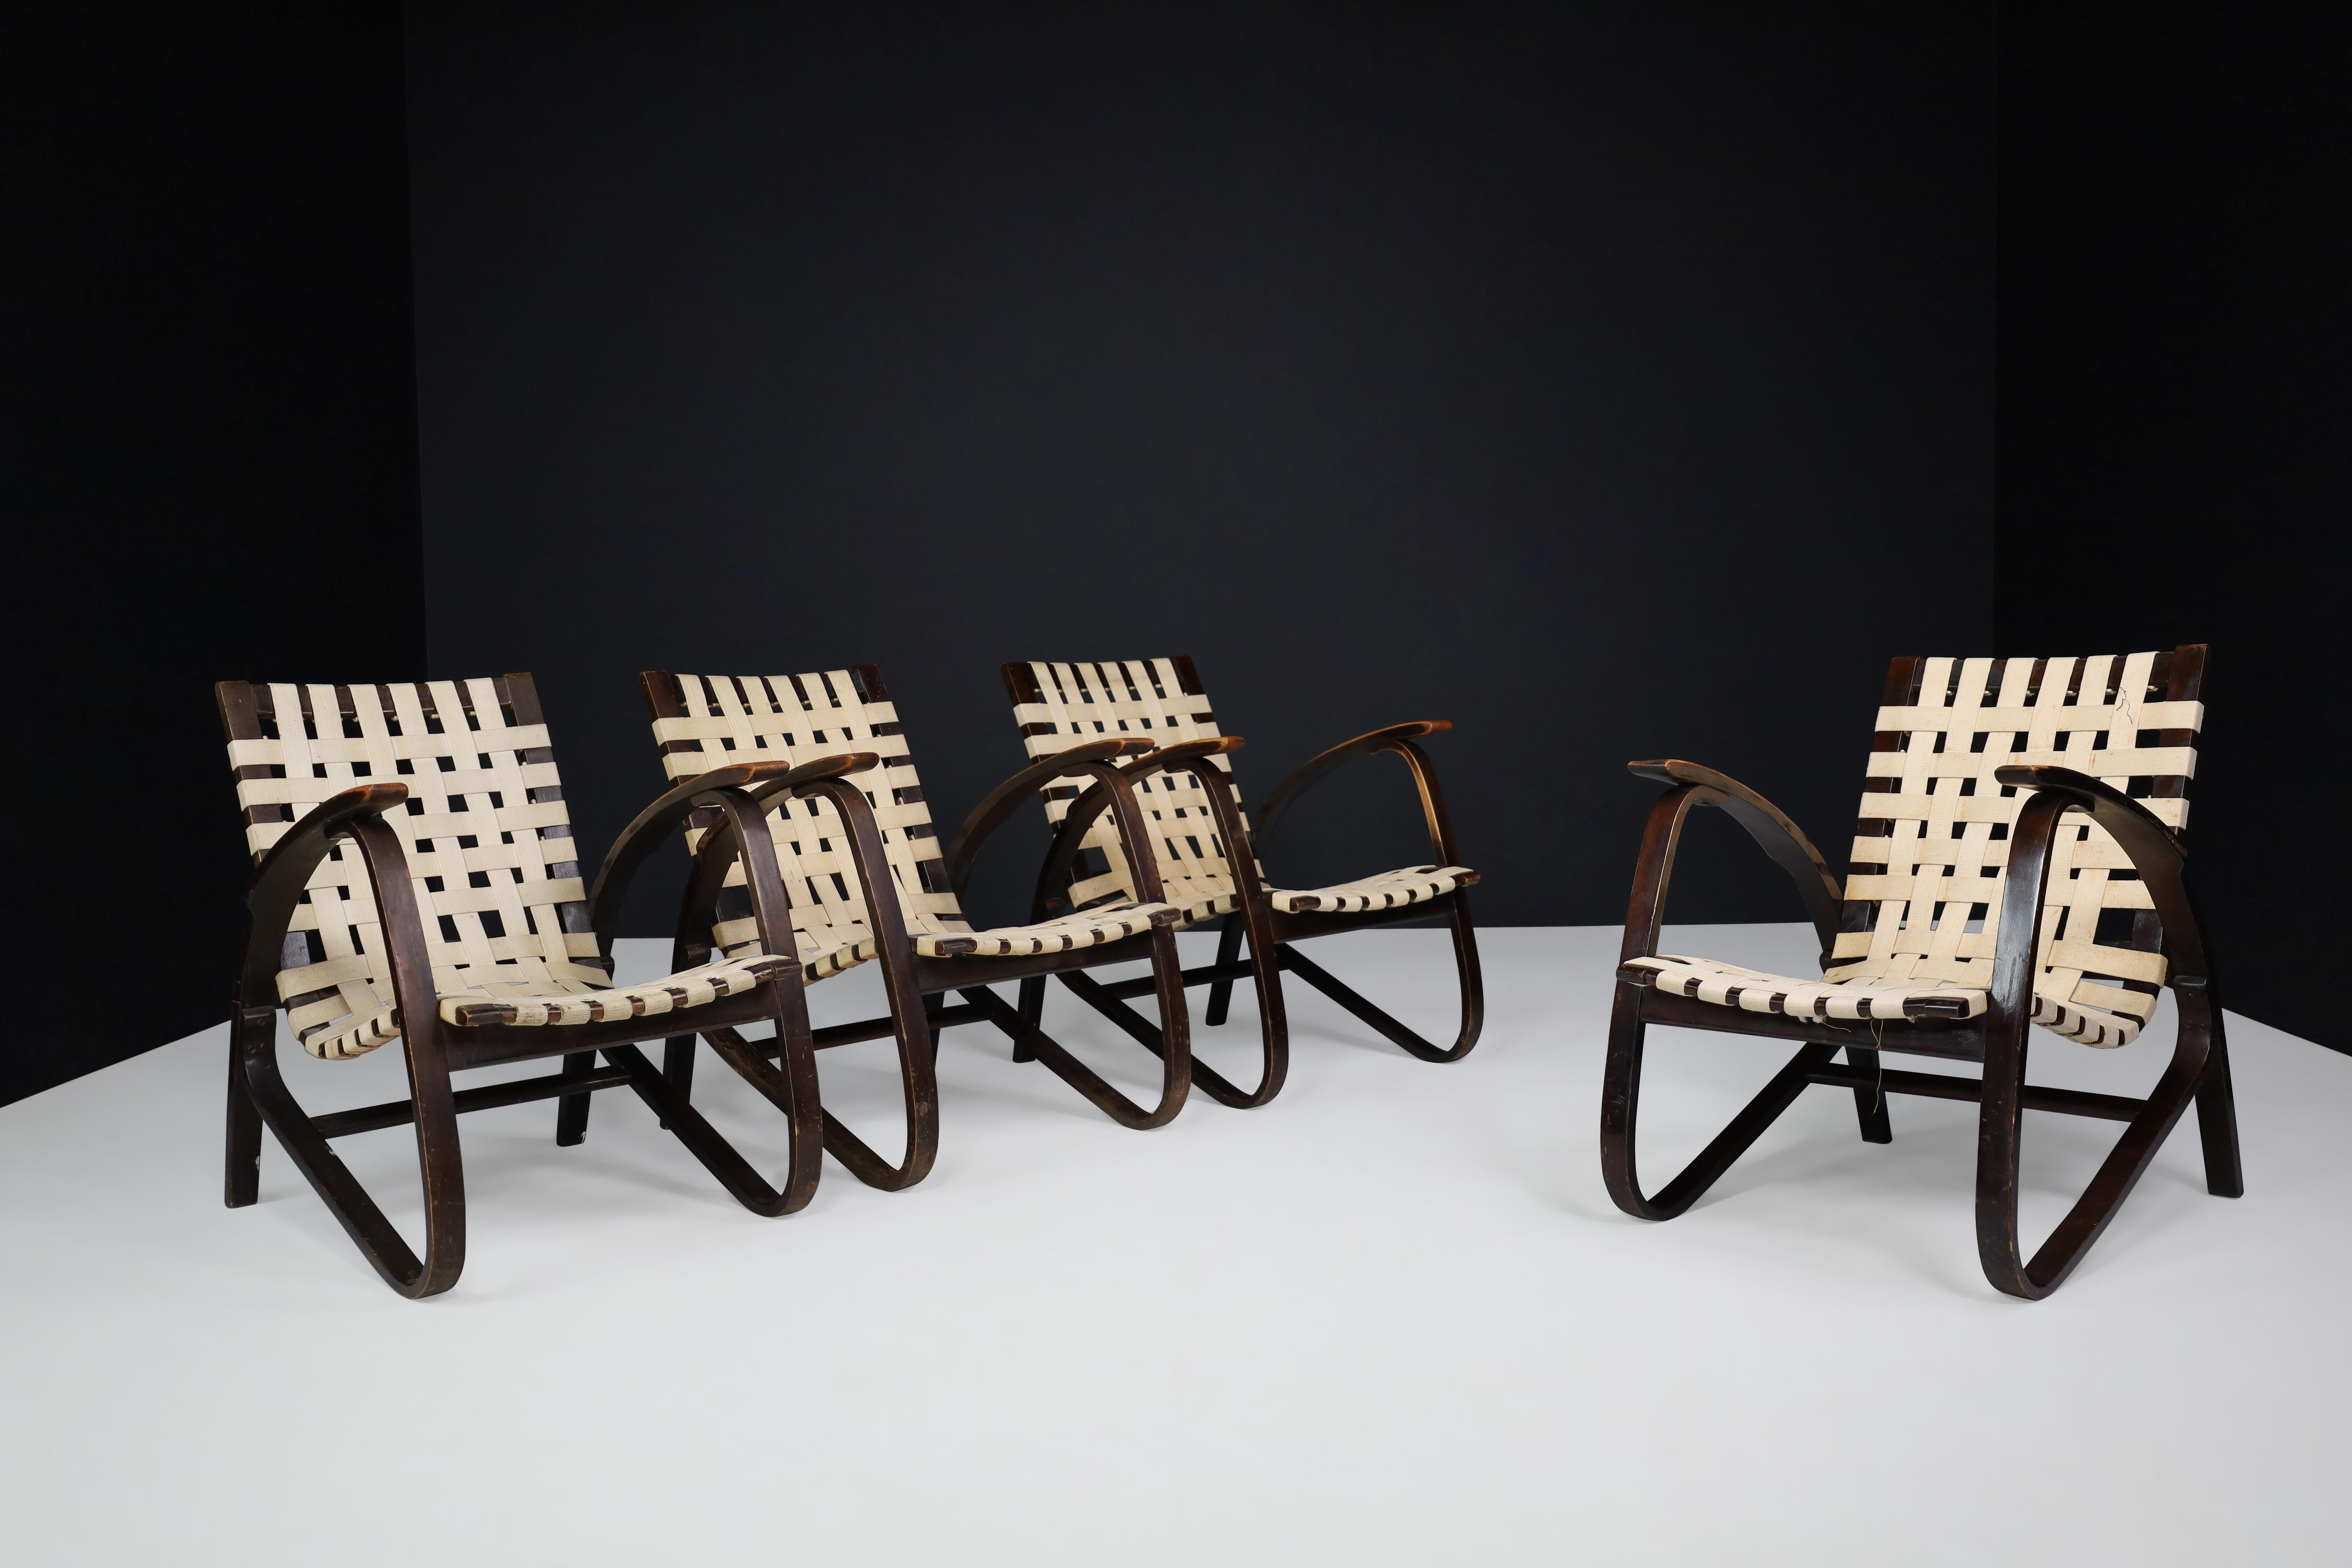 Jan Vanek pair of four lounge chairs in bentwood and patinated canvas, Praque 1940s

Pair of four elegant armchairs designed by Czech architect Jan Vanek in the 1940s, who was a contemporary of Jindrich Halabala. These chairs are upholstered with